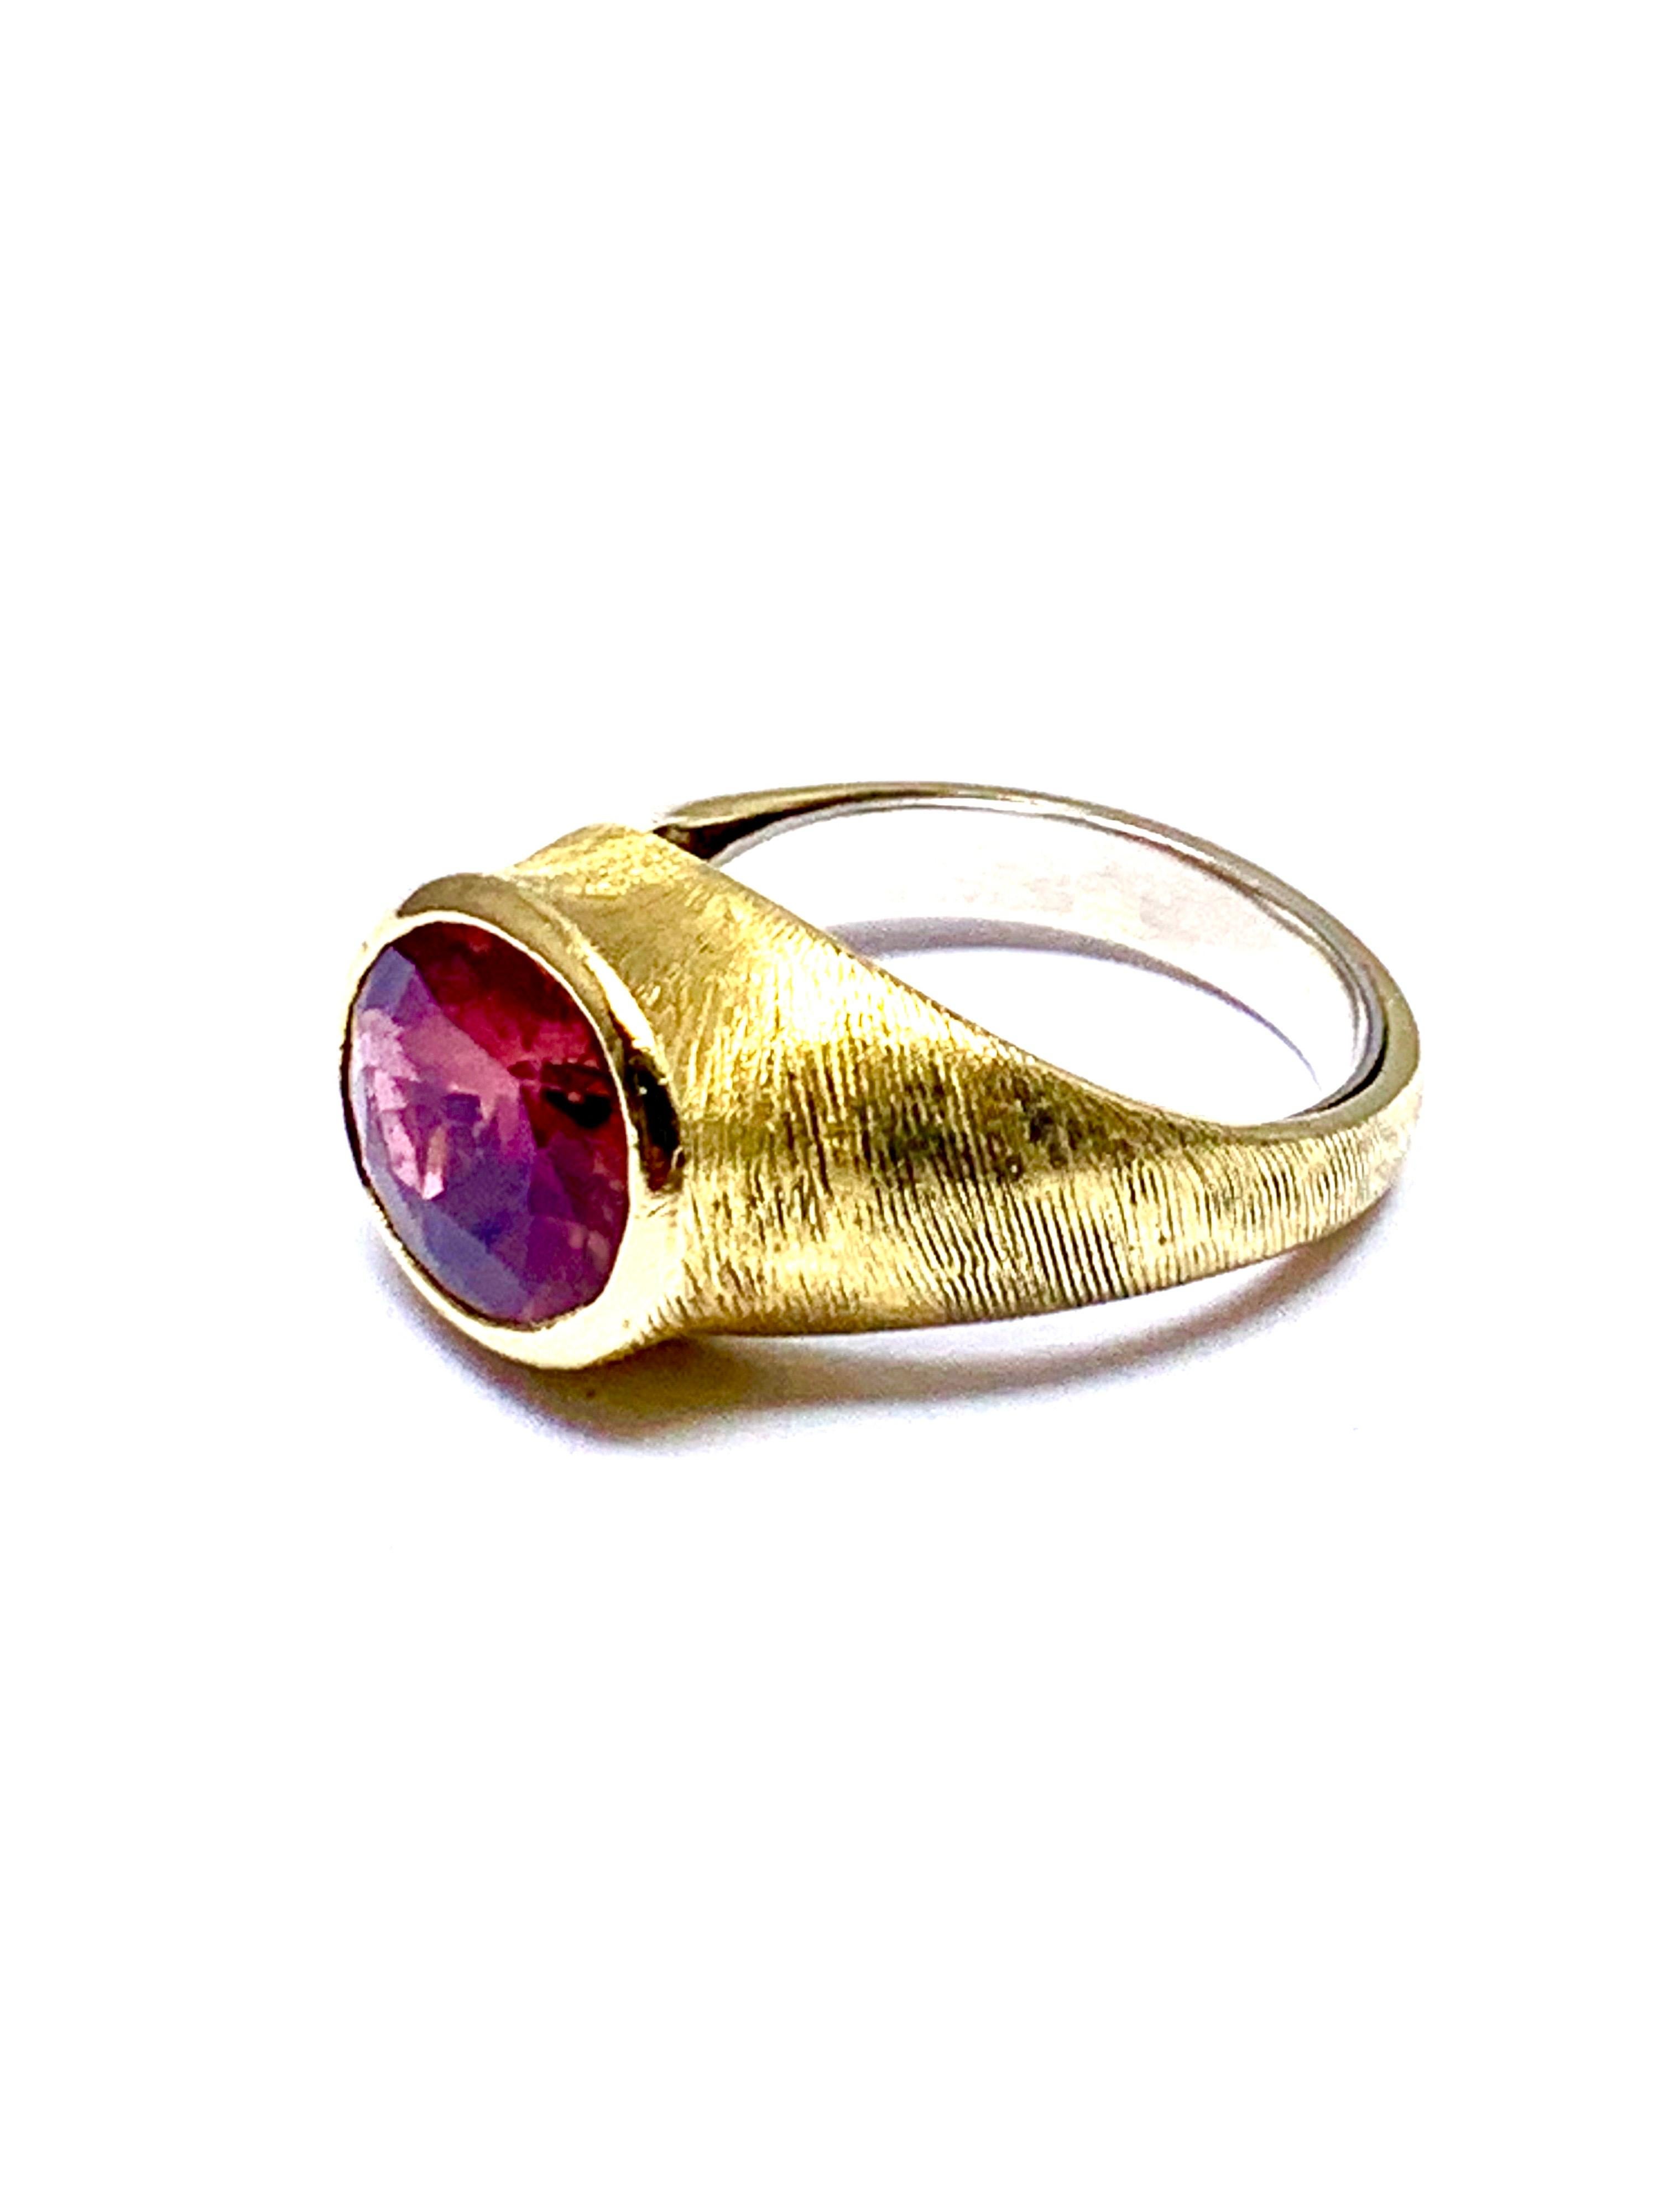 Burle Marx 3.57 Carat Faceted Oval Pink Tourmaline and 18 Karat Yellow Gold Ring In Excellent Condition In Chevy Chase, MD